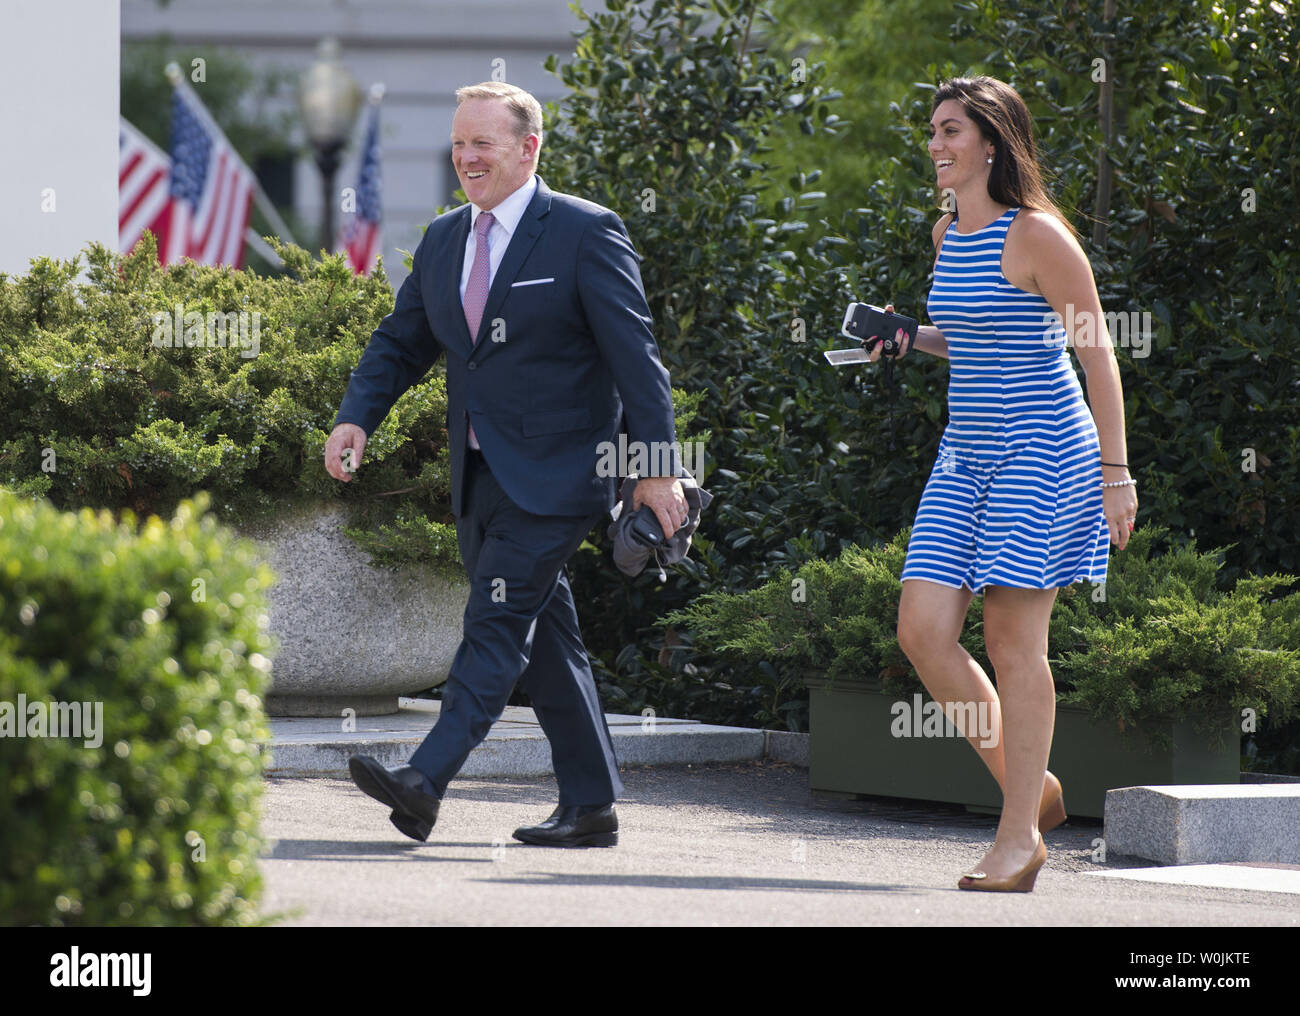 Outgoing White House Press Secretary Sean Spicer walks with aid Vanessa Morrone as they return to the White House in Washington, D.C. on July 21, 2017. Spicer announced his resignation earlier today and will be replaced by Principal Deputy White House Press Secretary Sarah Huckabee Sanders. Photo by Kevin Dietsch/UPI Stock Photo